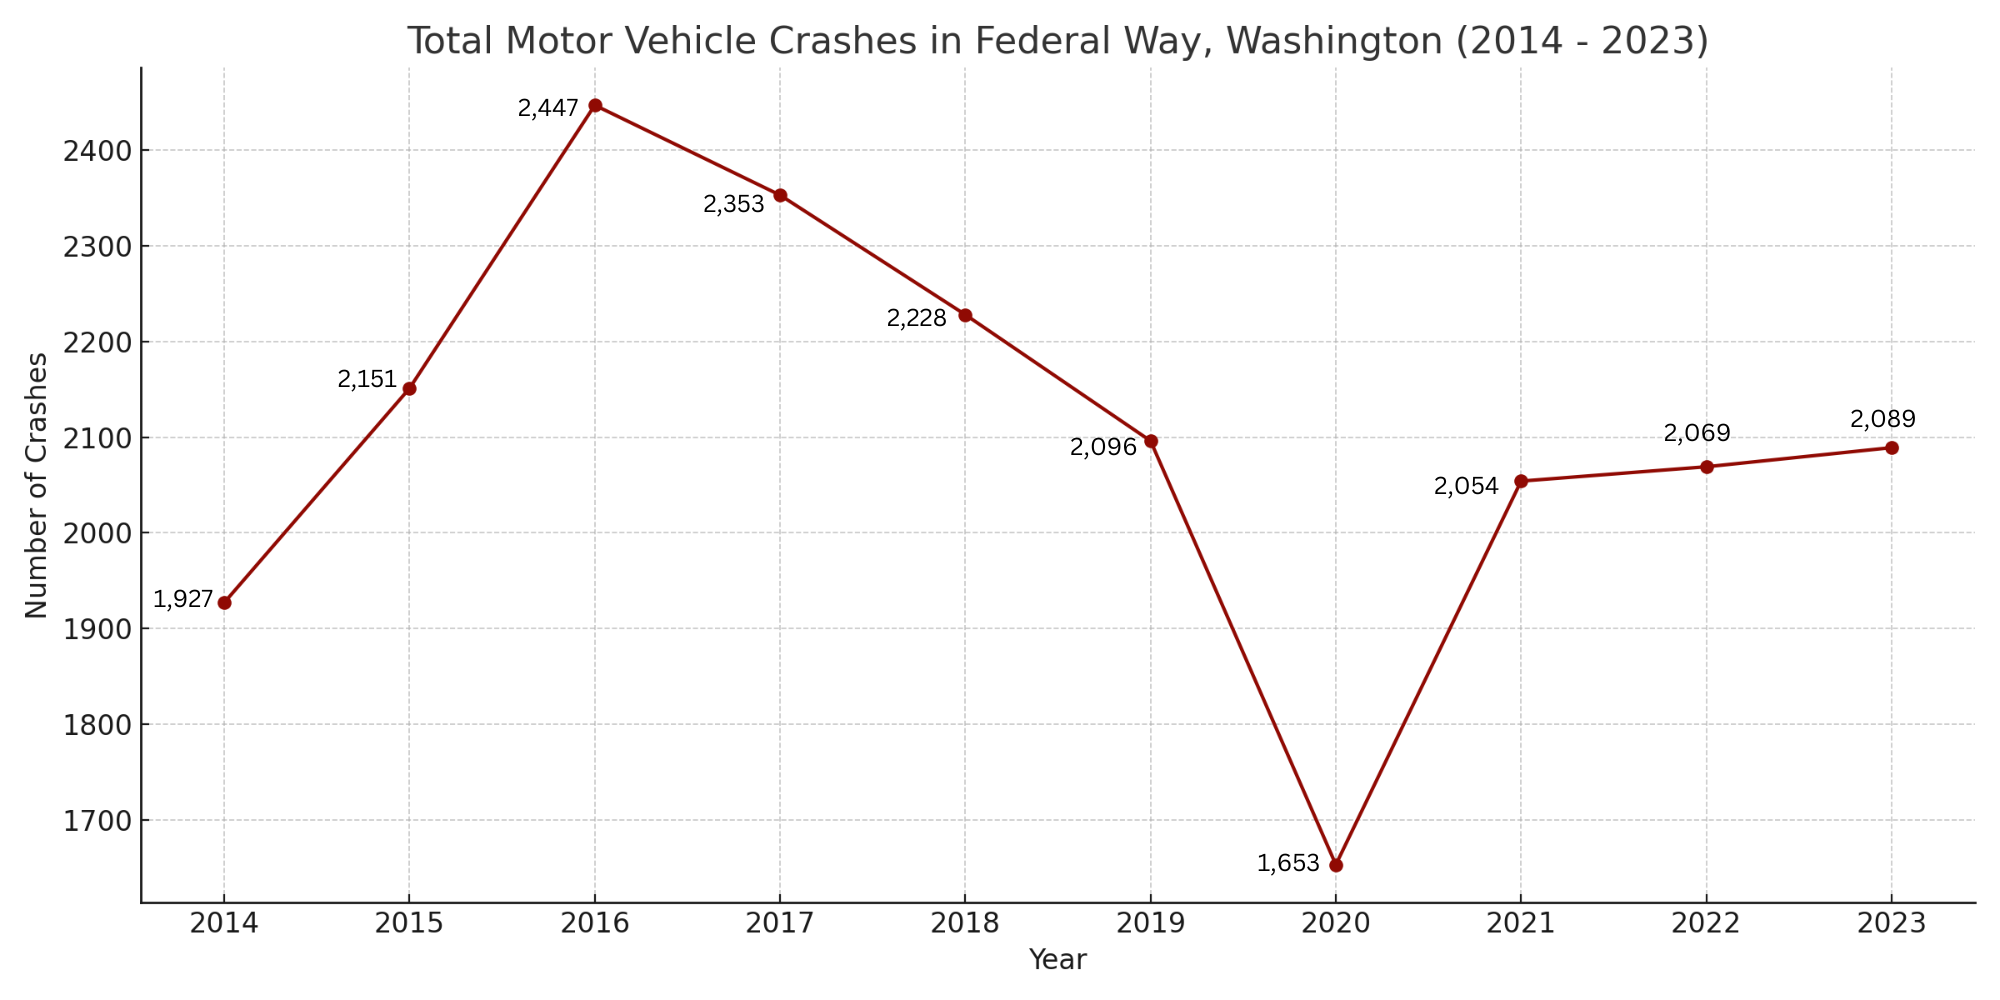 Line graph showing the annual number of motor vehicle crashes in Federal Way, Washington from 2014 to 2023. The graph displays a red line with data points marked by circles. The years are listed on the x-axis and the number of crashes on the y-axis. The data shows fluctuations over the years with a notable dip in 2020.